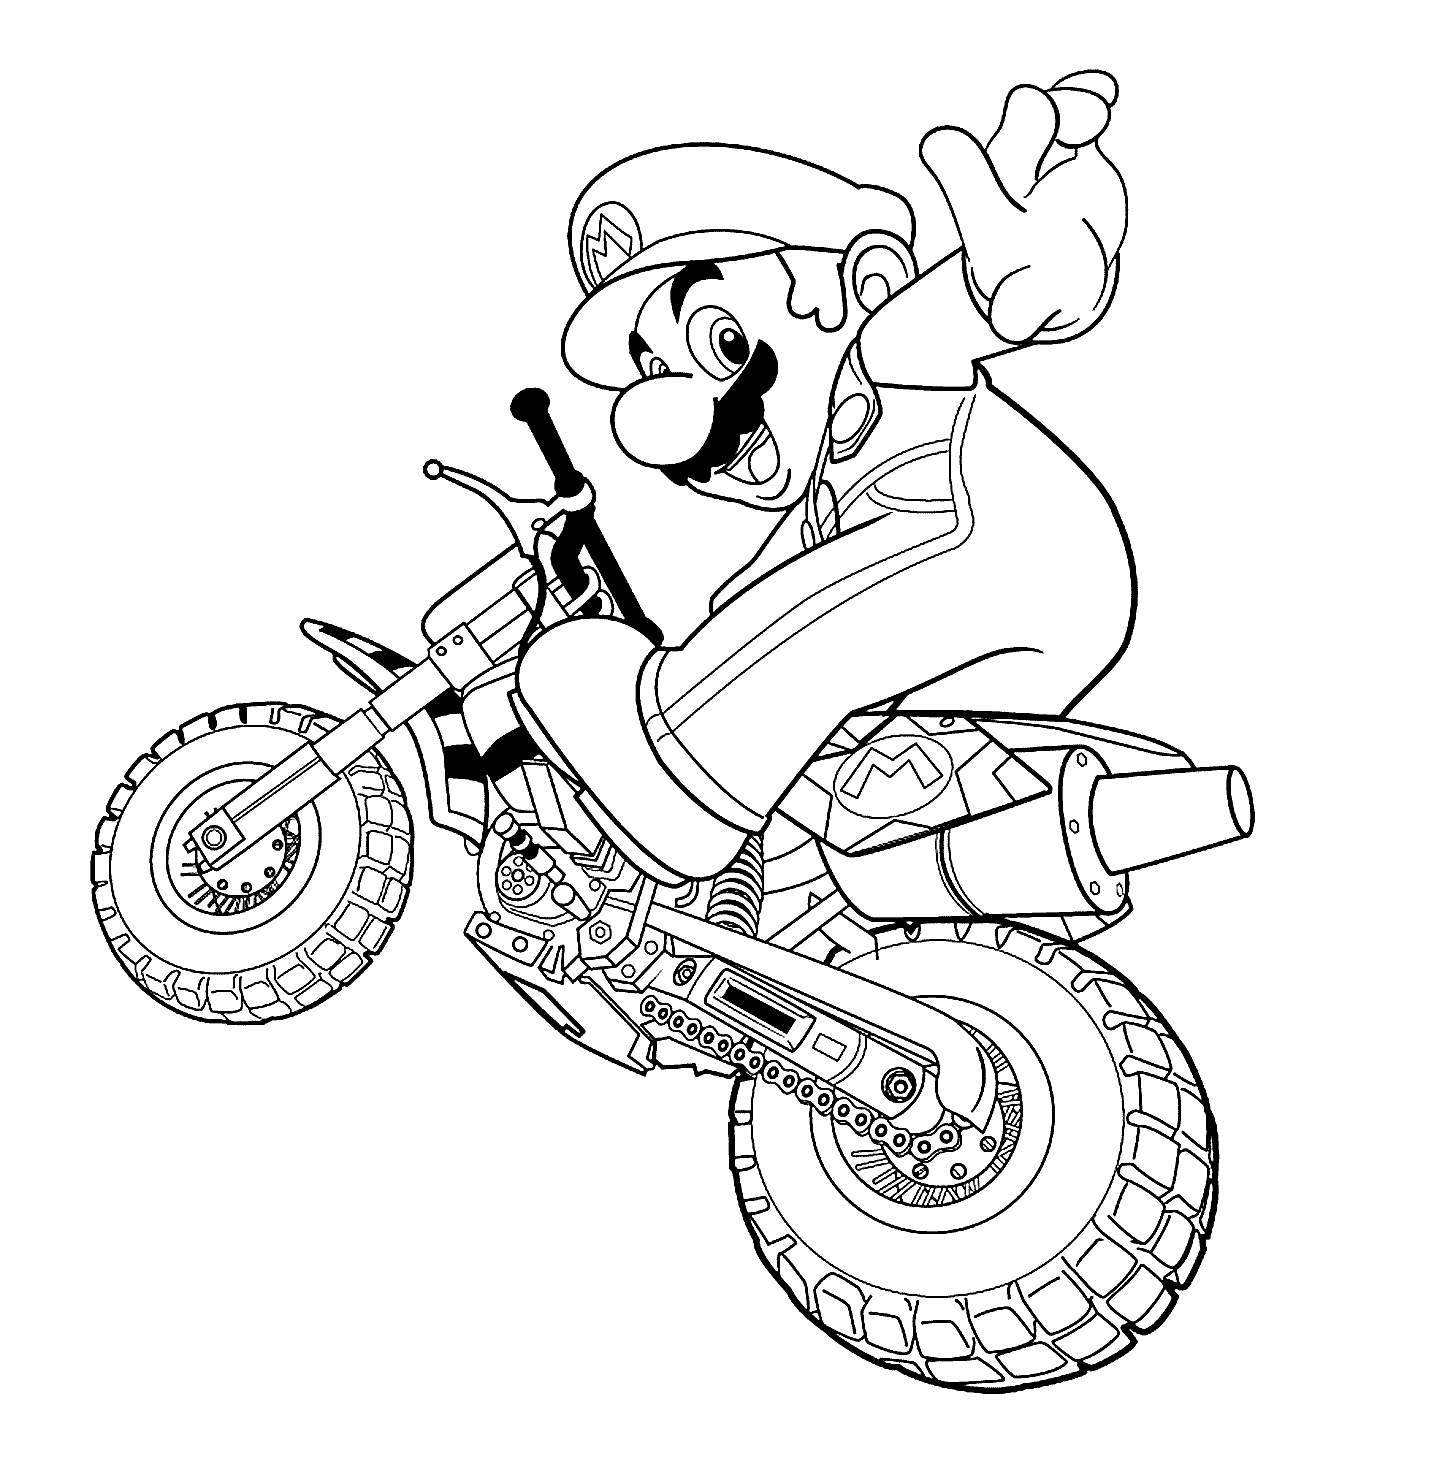 Mario The Motor Driver Coloring Page